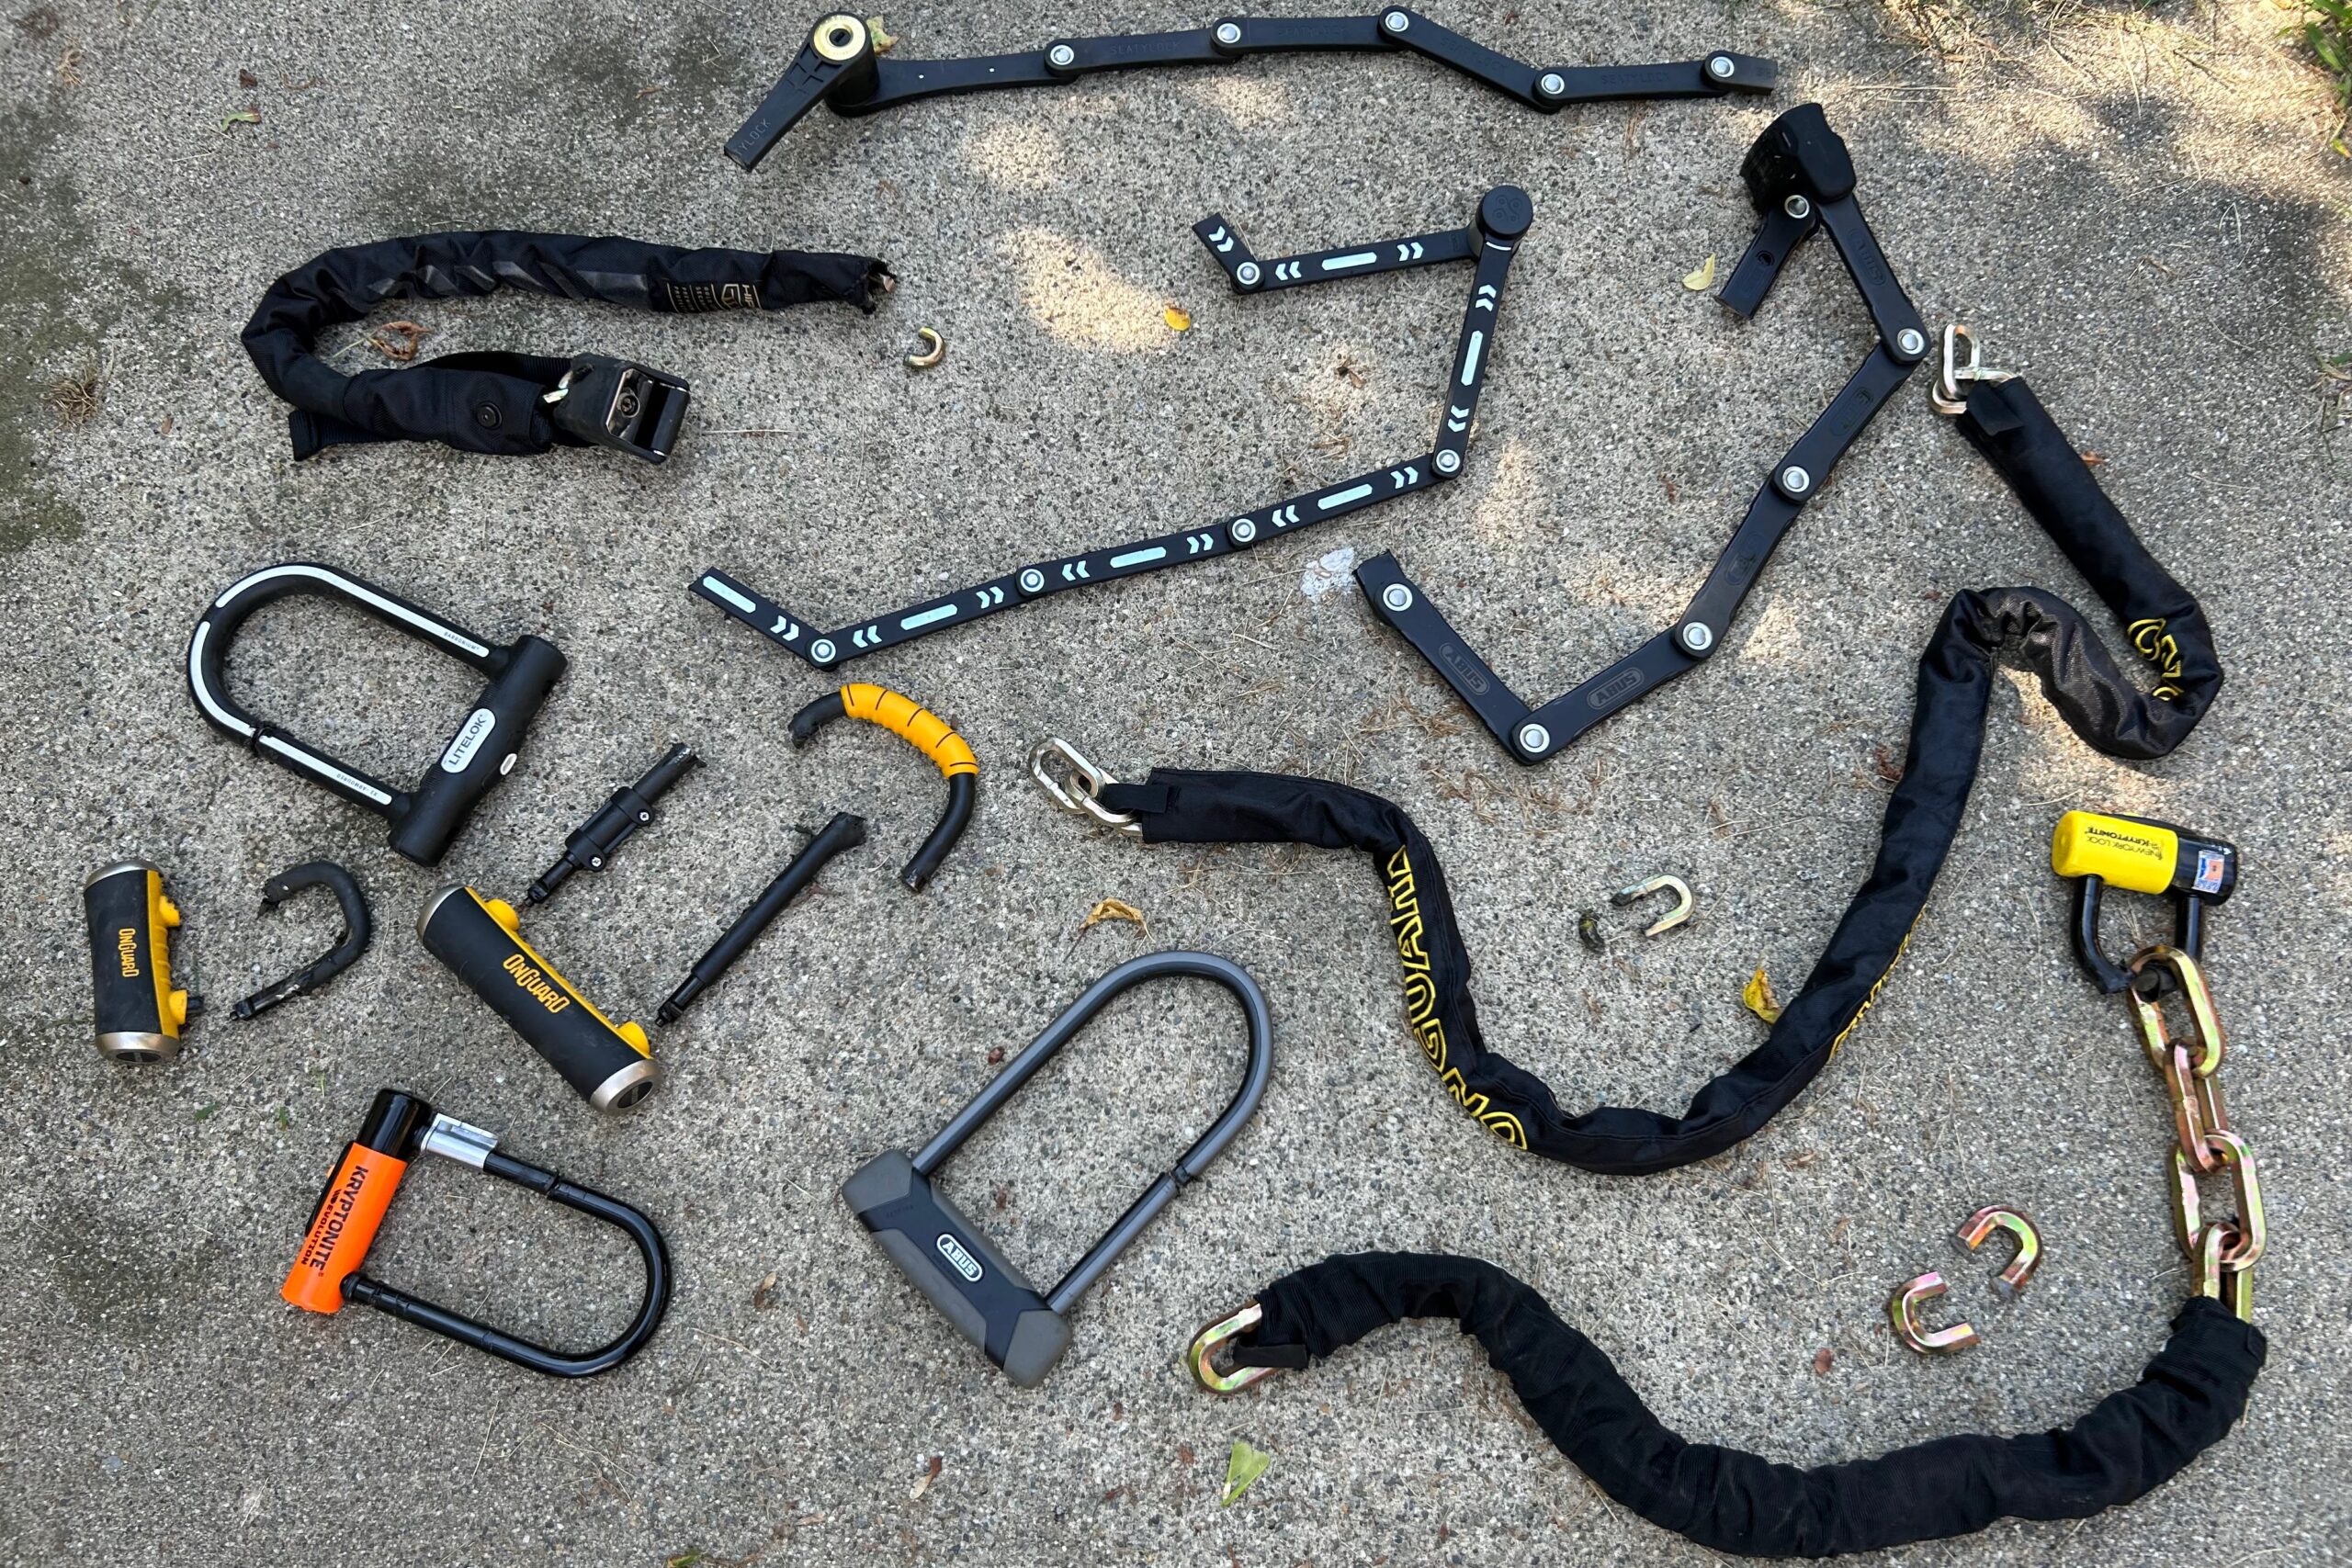 The selection of bike locks we tested